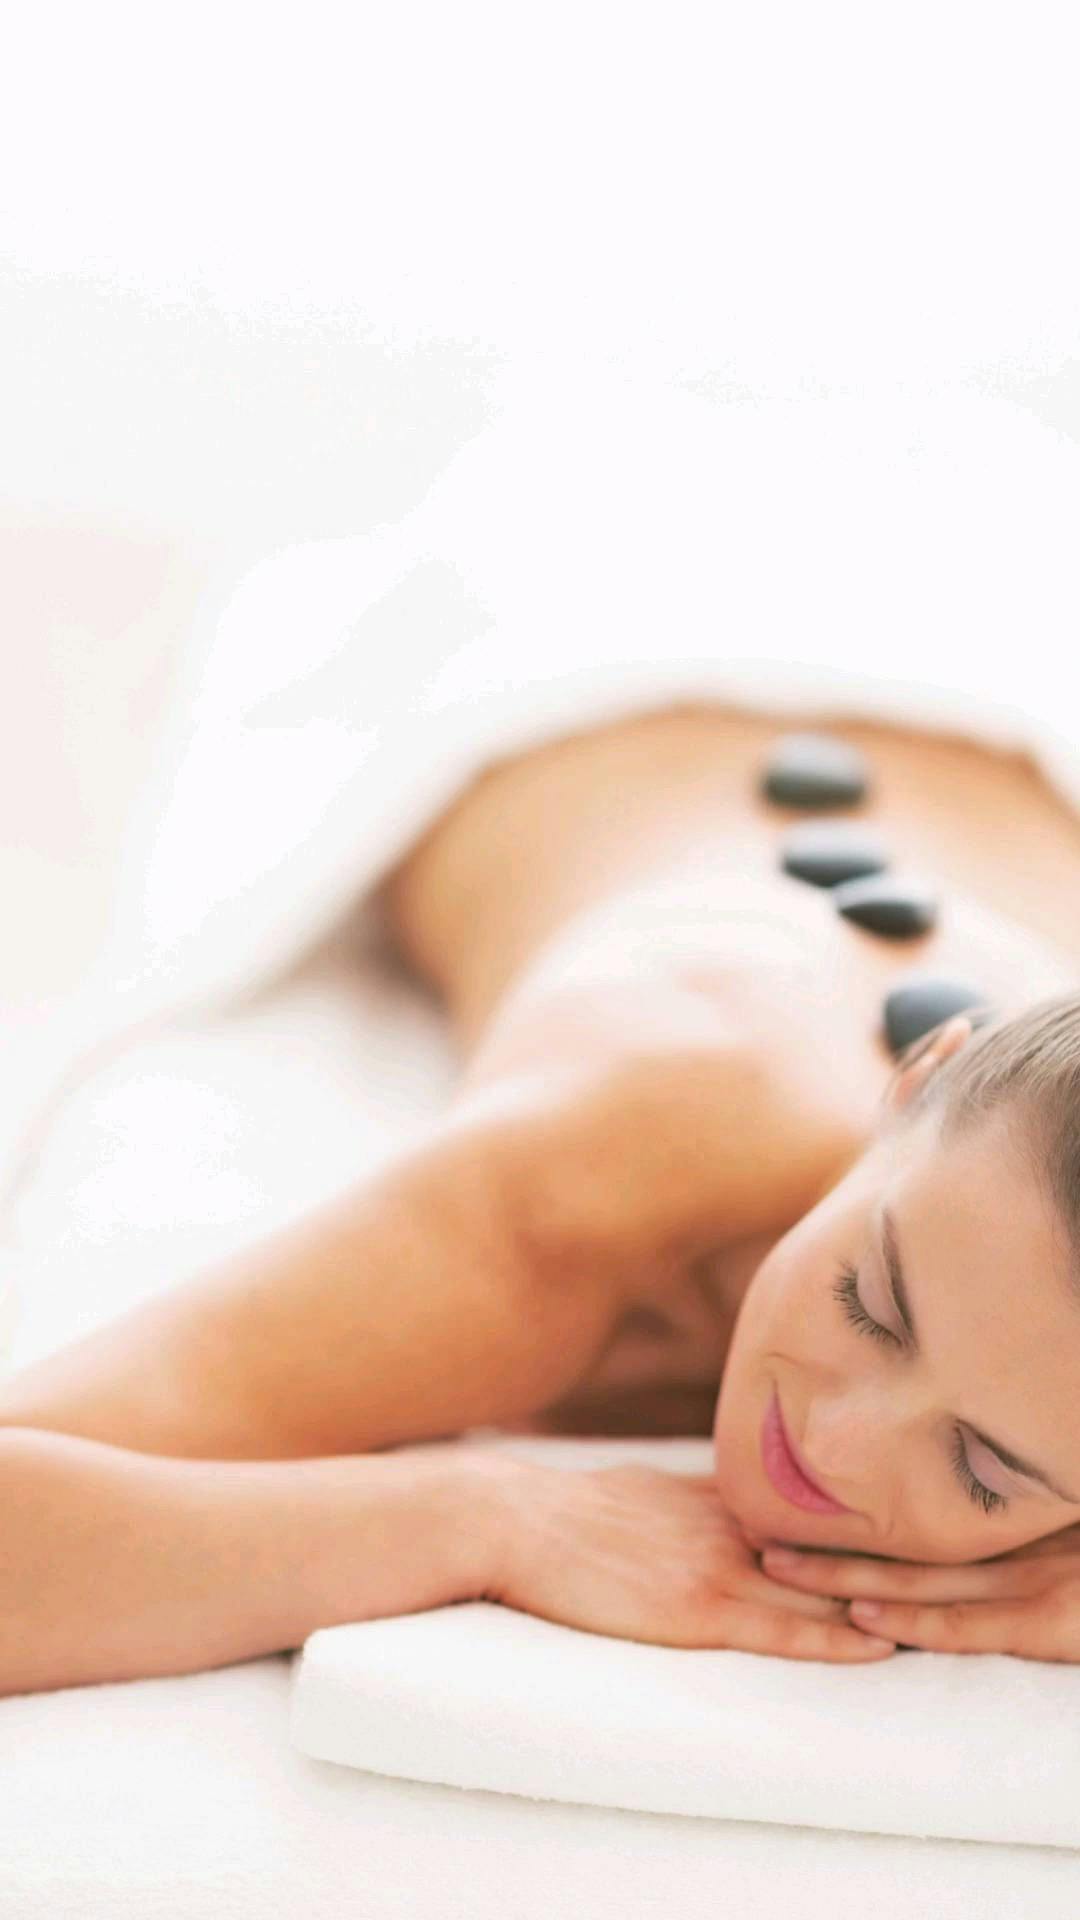 Take some time out to reconnect with yourself and let us soothe your tired muscles and joints. Hot stone massage with essential oils and Ayurvedic oils can help ease pain and bring harmony to your body and mind.

Book now and relax like never before (Link in bio 👆 )

#waxingsalon #sydneybeauty #wellnesstip #beautyroutine #facialskin #sydneybasedbusiness #northernbeachesmumsnbubs #sydneybeautician #sydneybeautyspa #facialpeel #nbliving #northernbeachesmums #beautycareroutine #facialssydney #essenceofserenity #sydneybeautytherapist #beautyclinic #northshoremums #northernbeachesbusiness